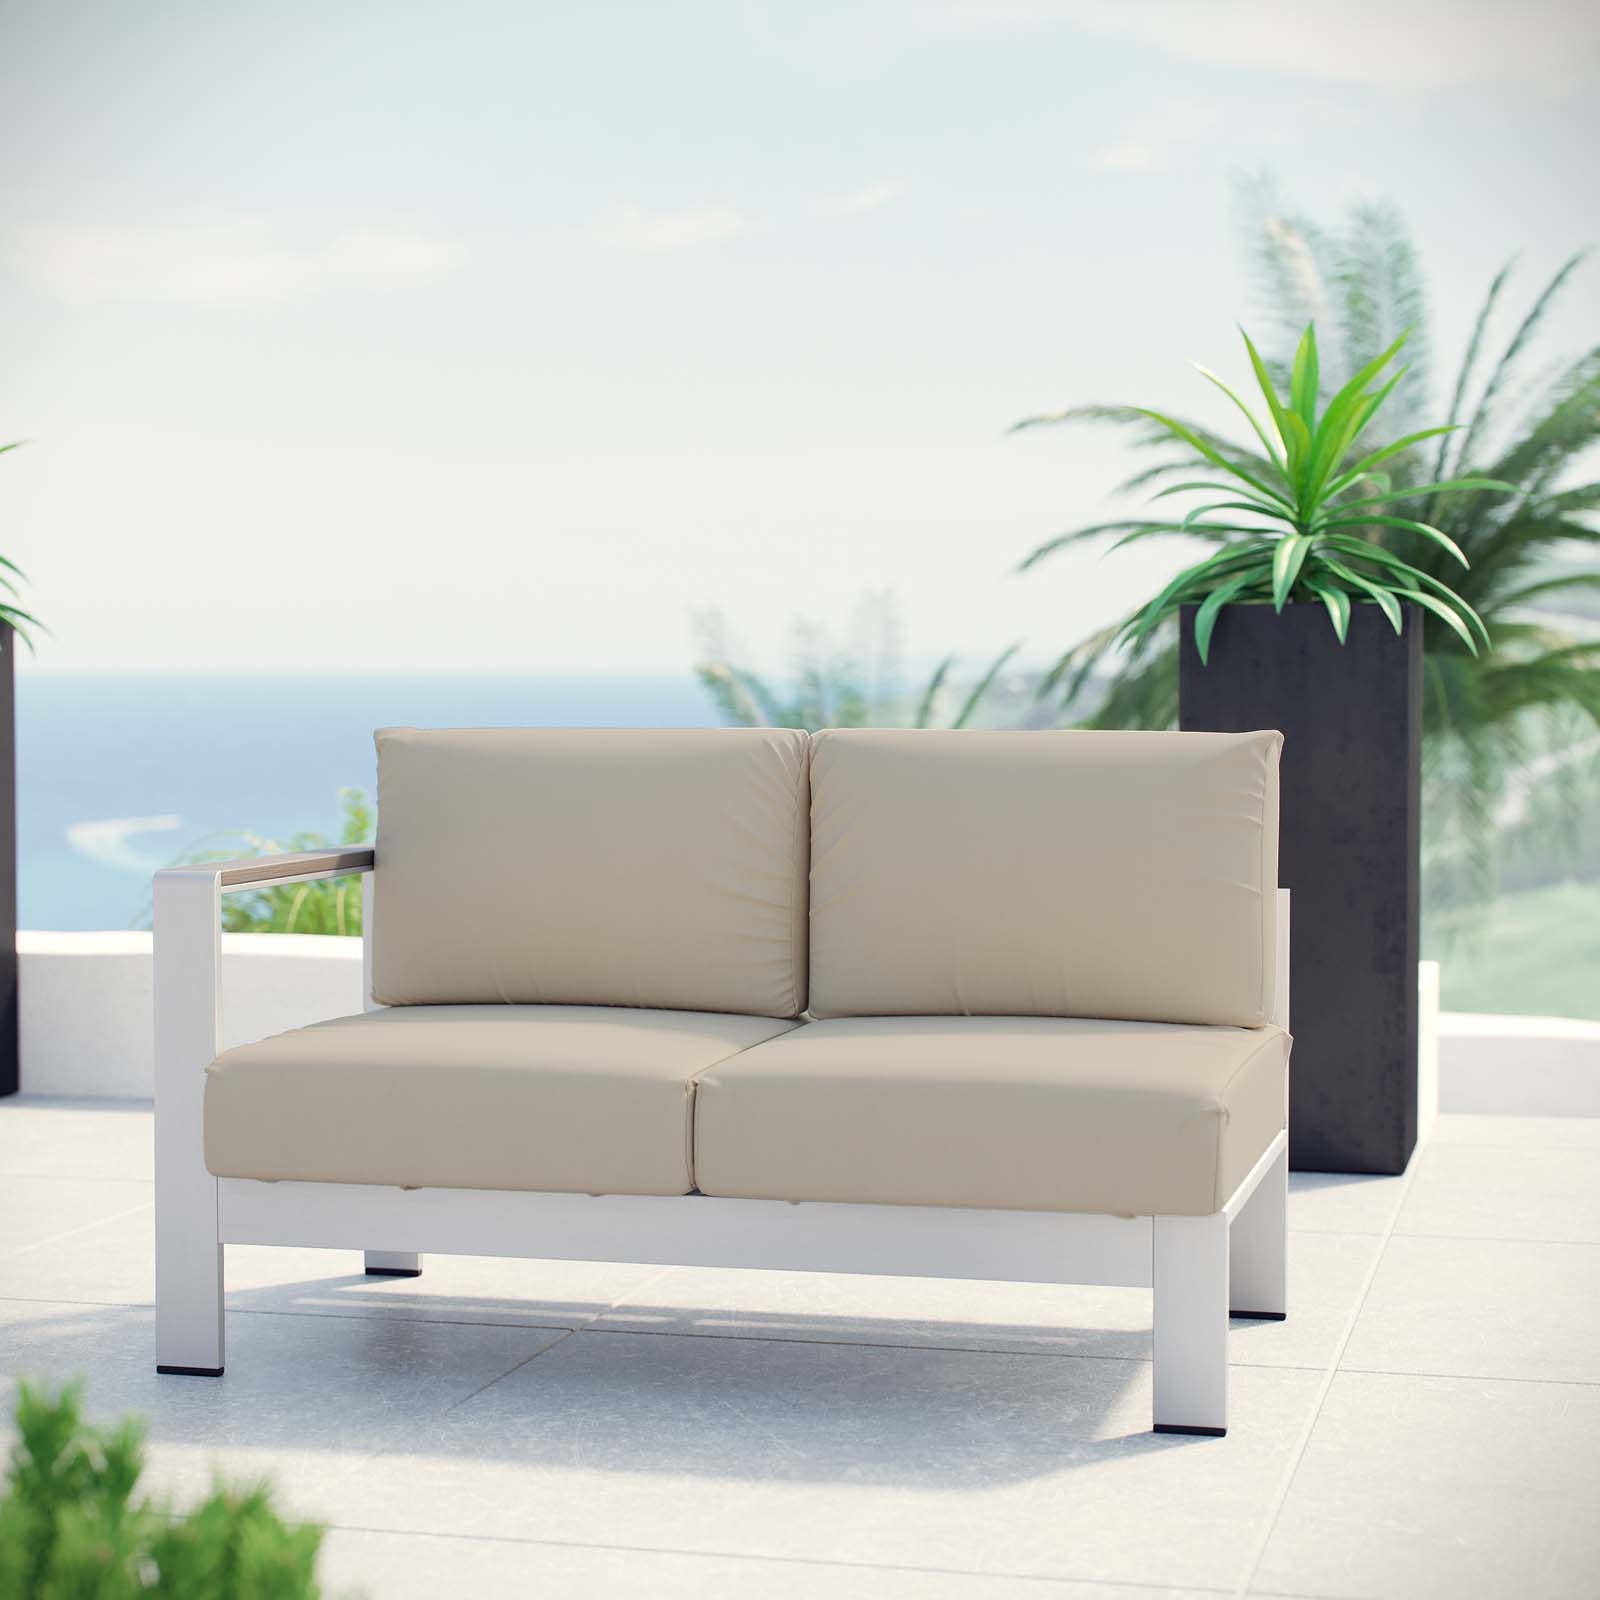 Shore Left-Arm Corner Sectional Outdoor Patio Aluminum Loveseat-Outdoor Loveseat-Modway-Wall2Wall Furnishings